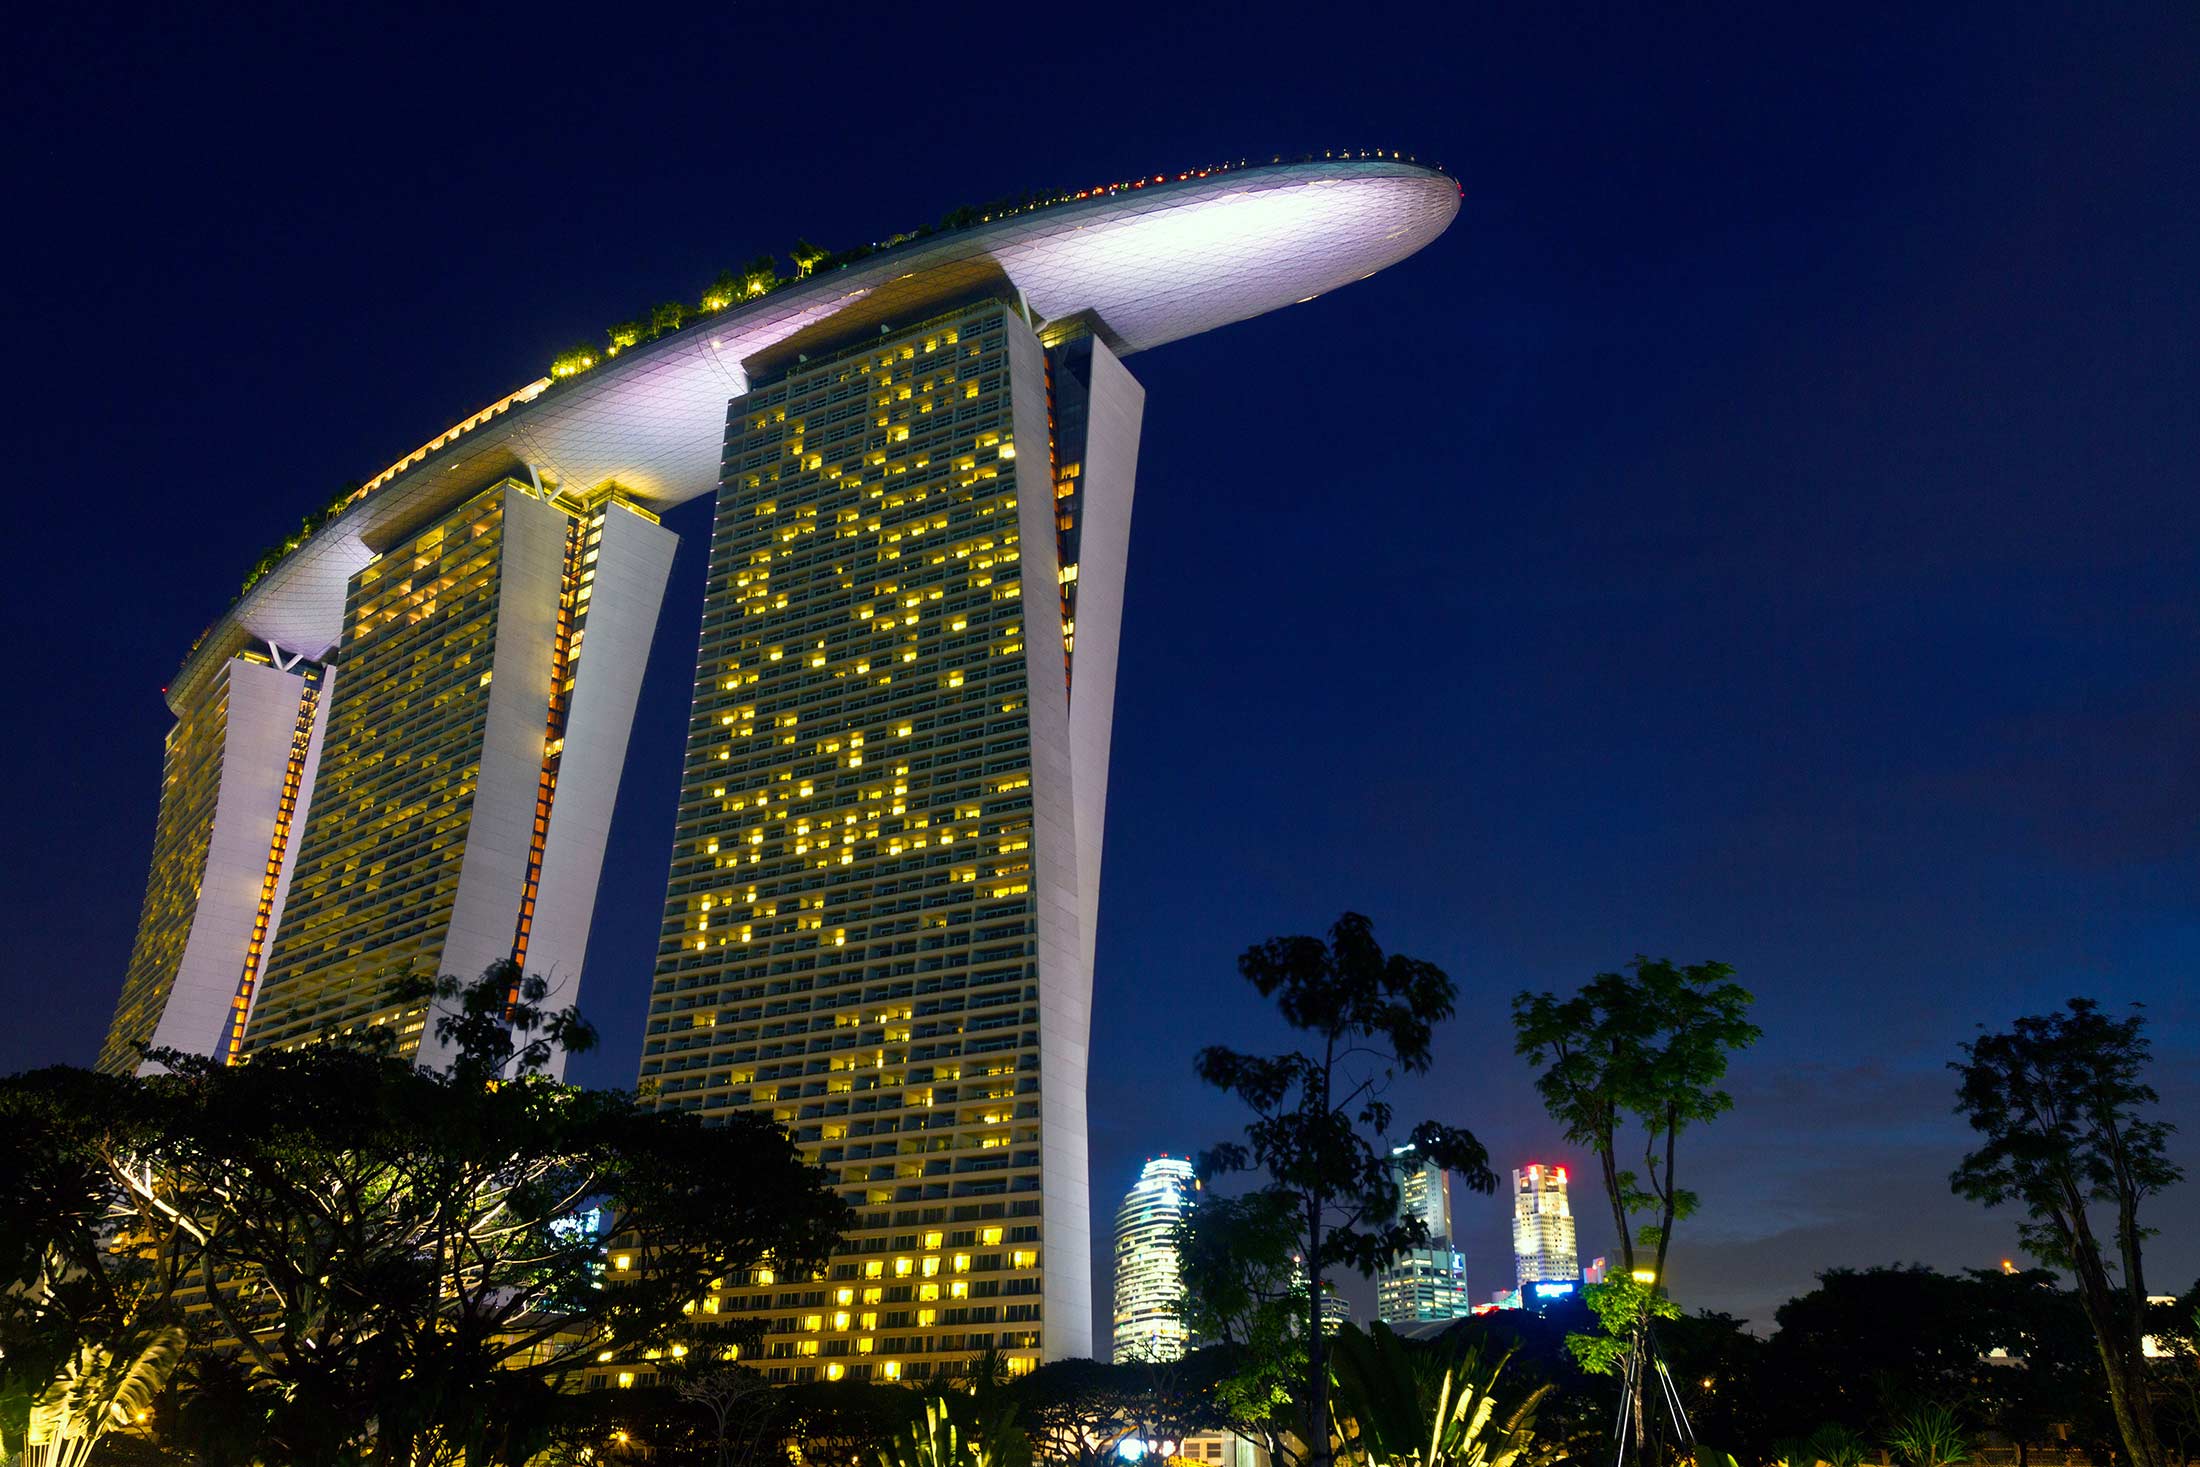 The Marina Bay Sands hotel and casino in Singapore.